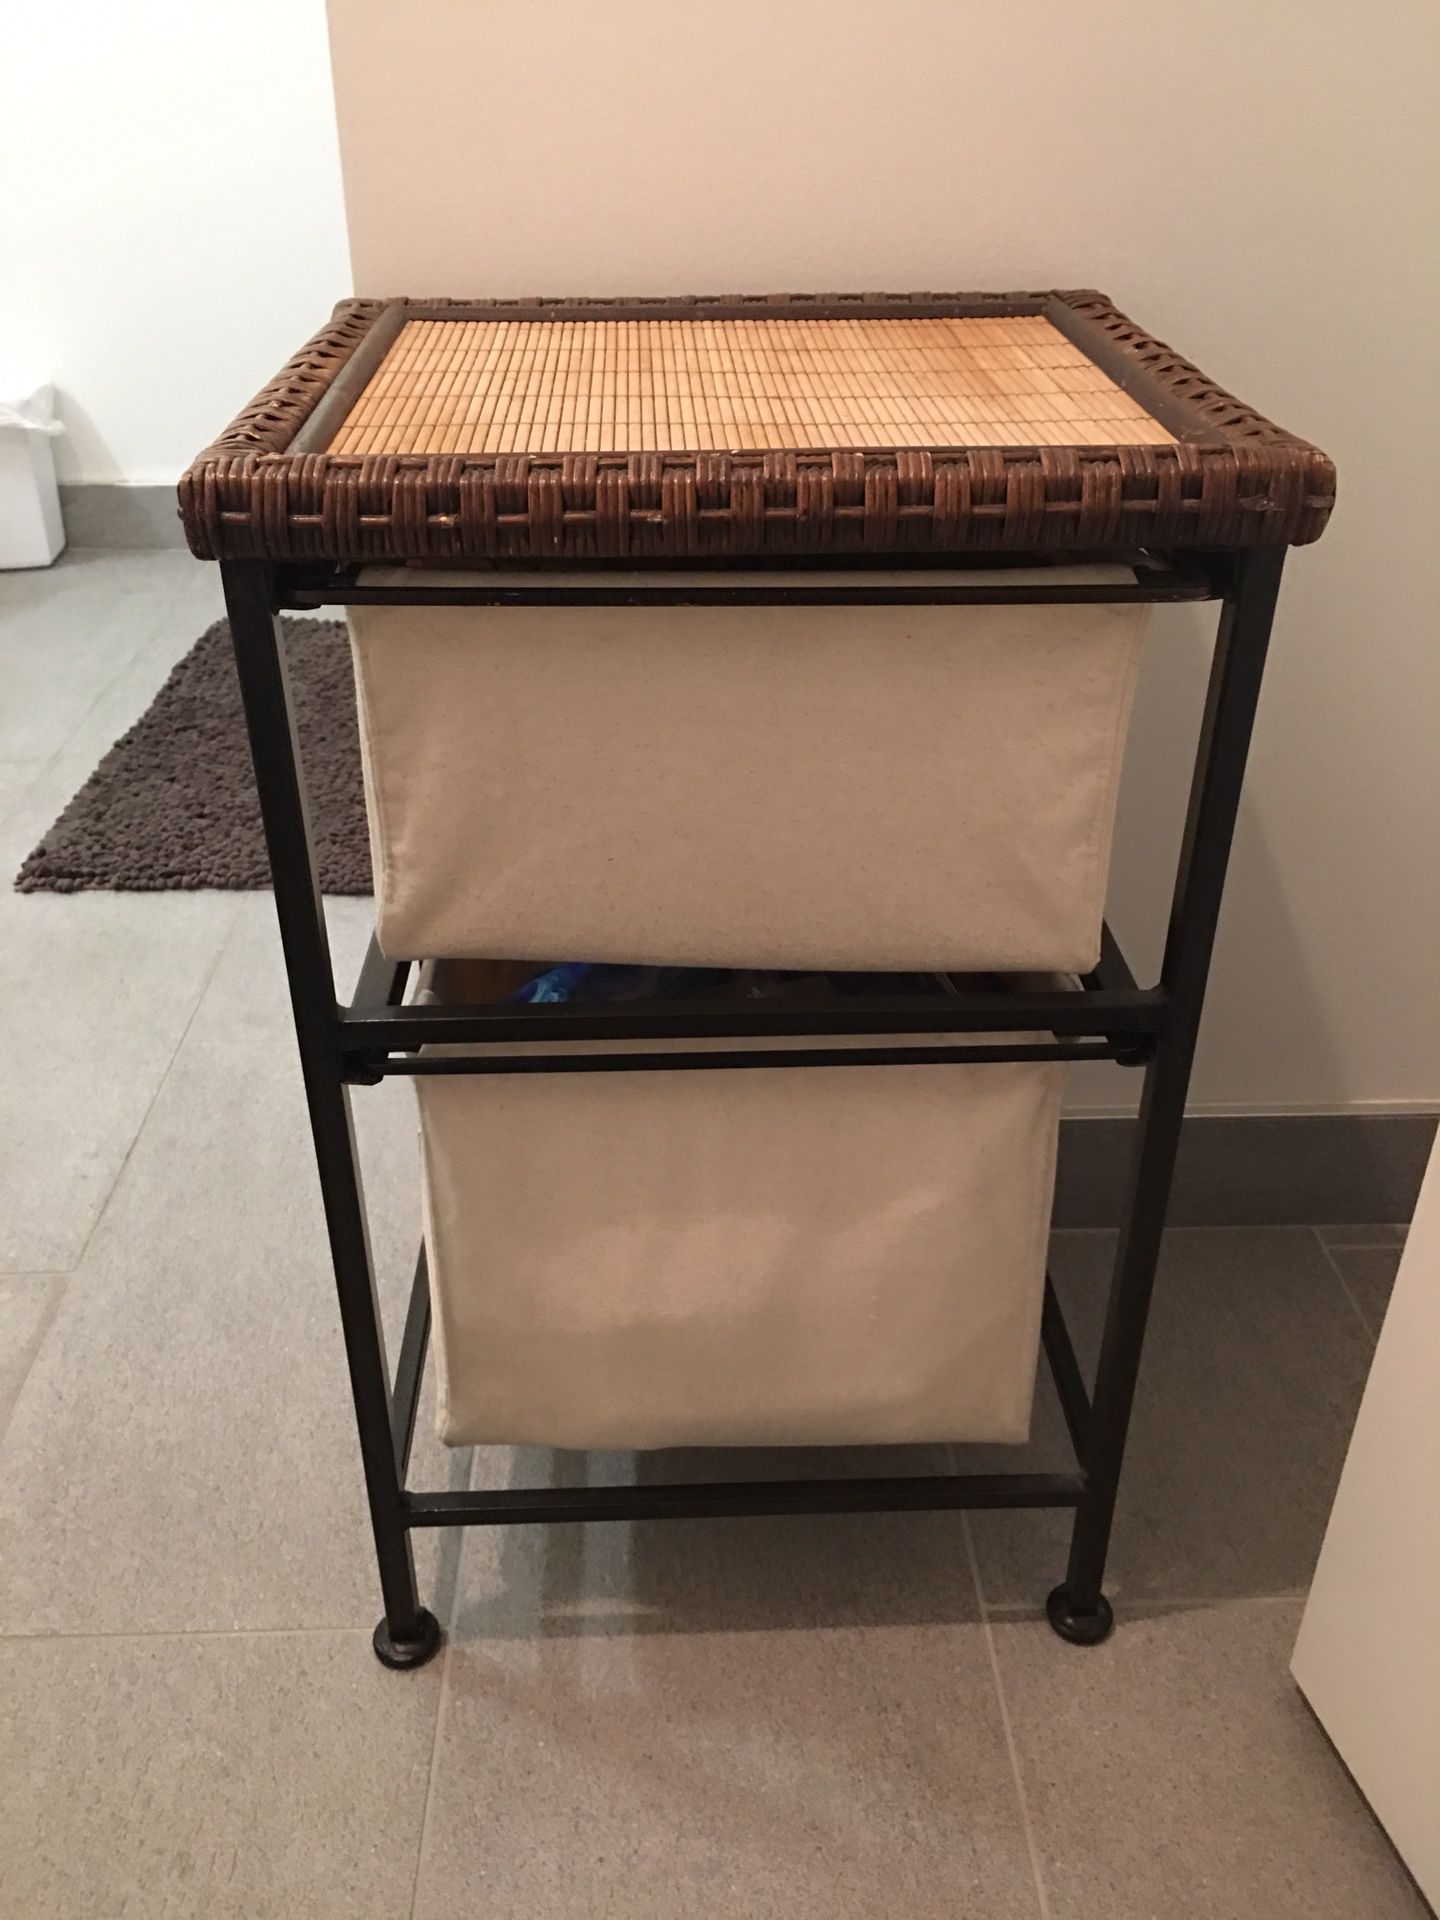 Wrought Iron, Linen and Wicker storage unit and end table. Super convenient and stylish. 16x16x26” Cash or Venmo only. Must be willing to pick up fro